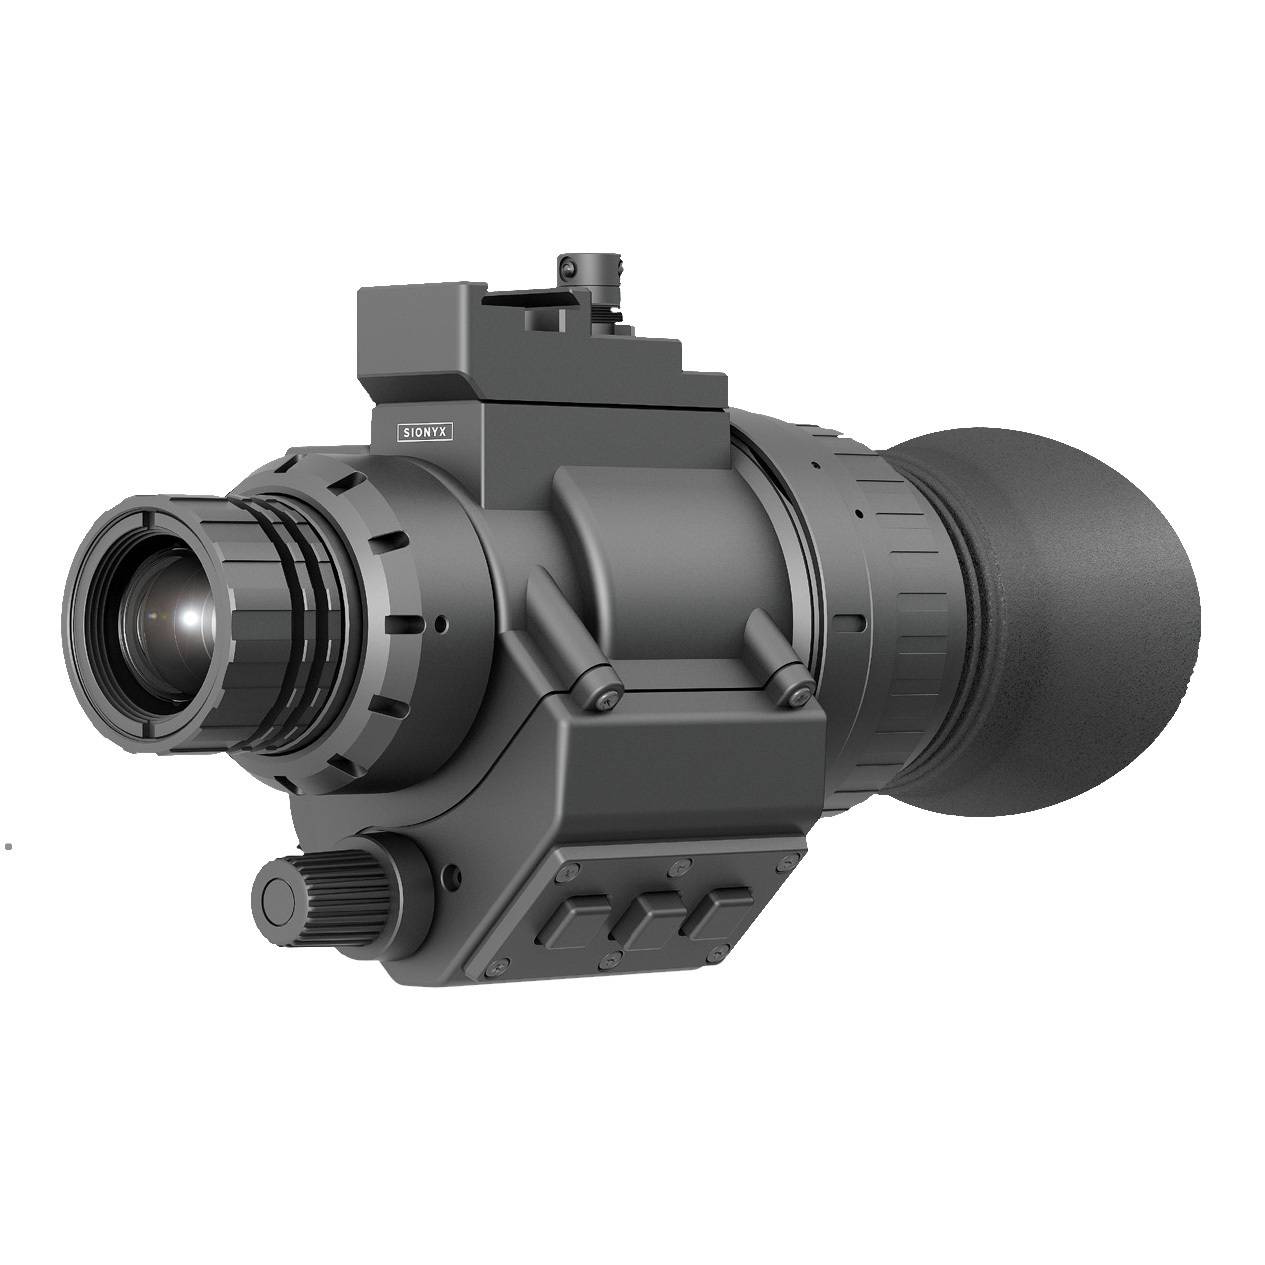 SiOnyx OPSIN Ultra Low-Light Color Monocular